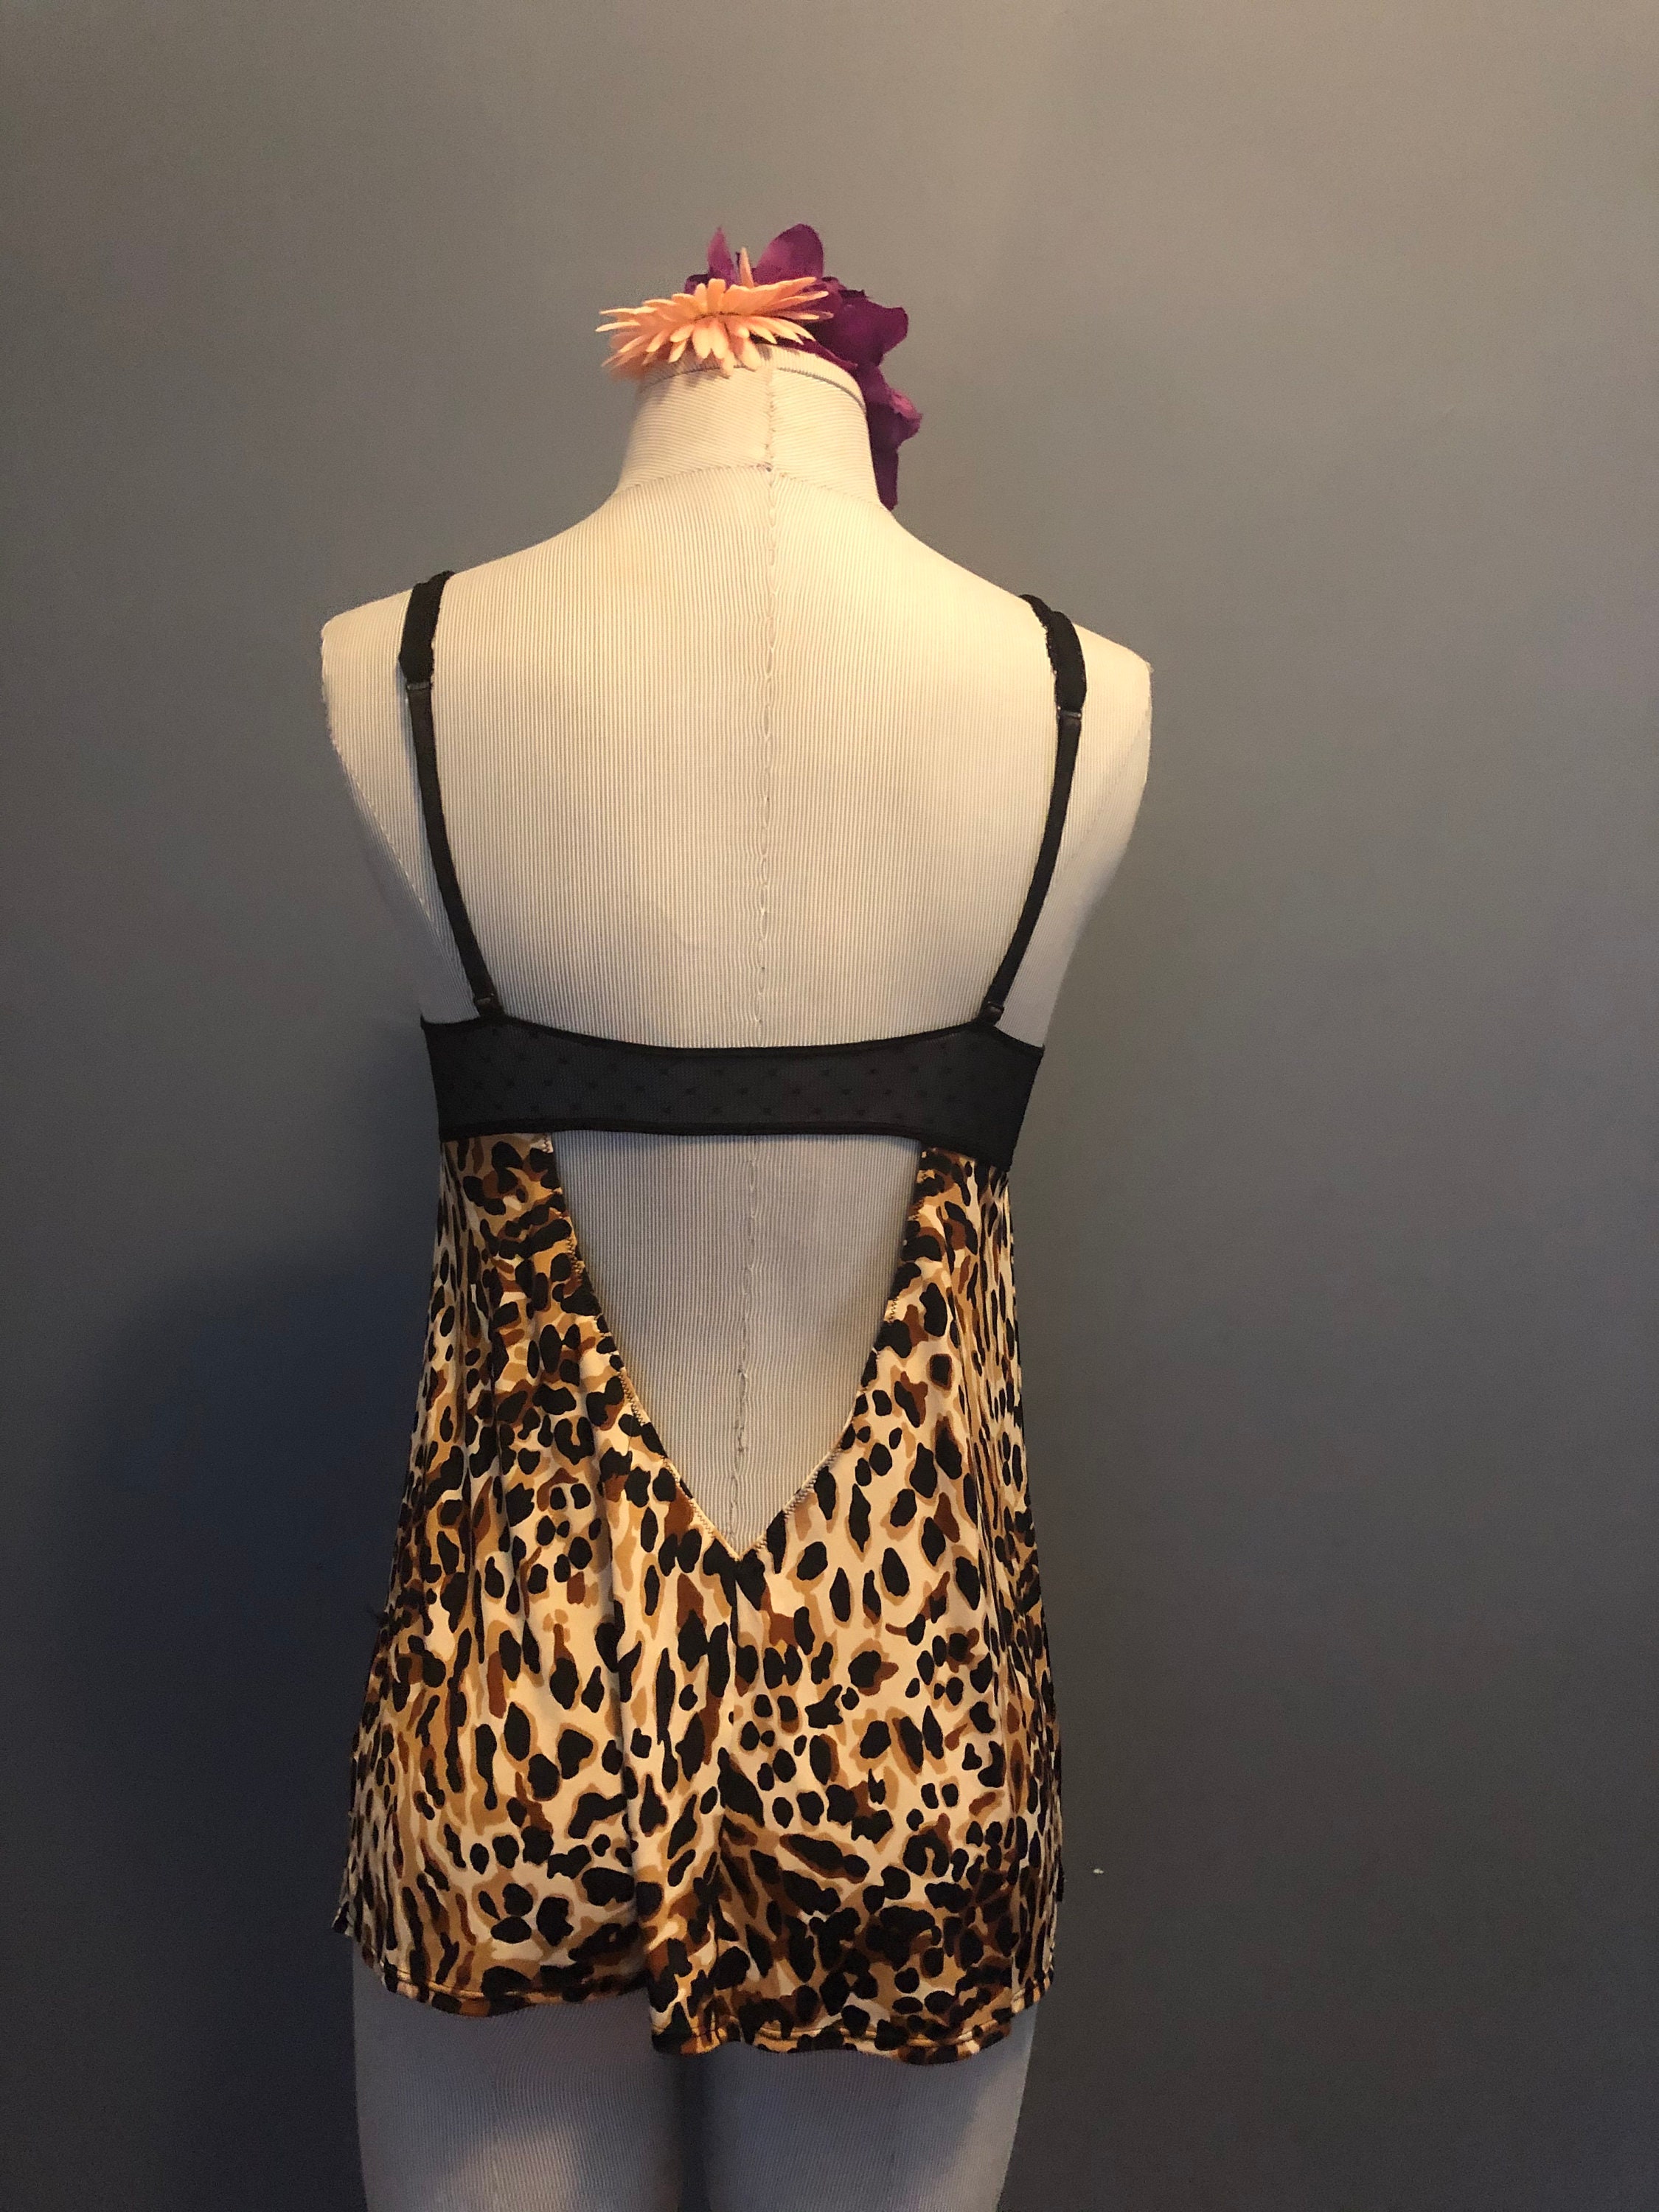 38 Bust / Vintage Betsey Johnson Leopard Cami Top / 1990s | Etsy